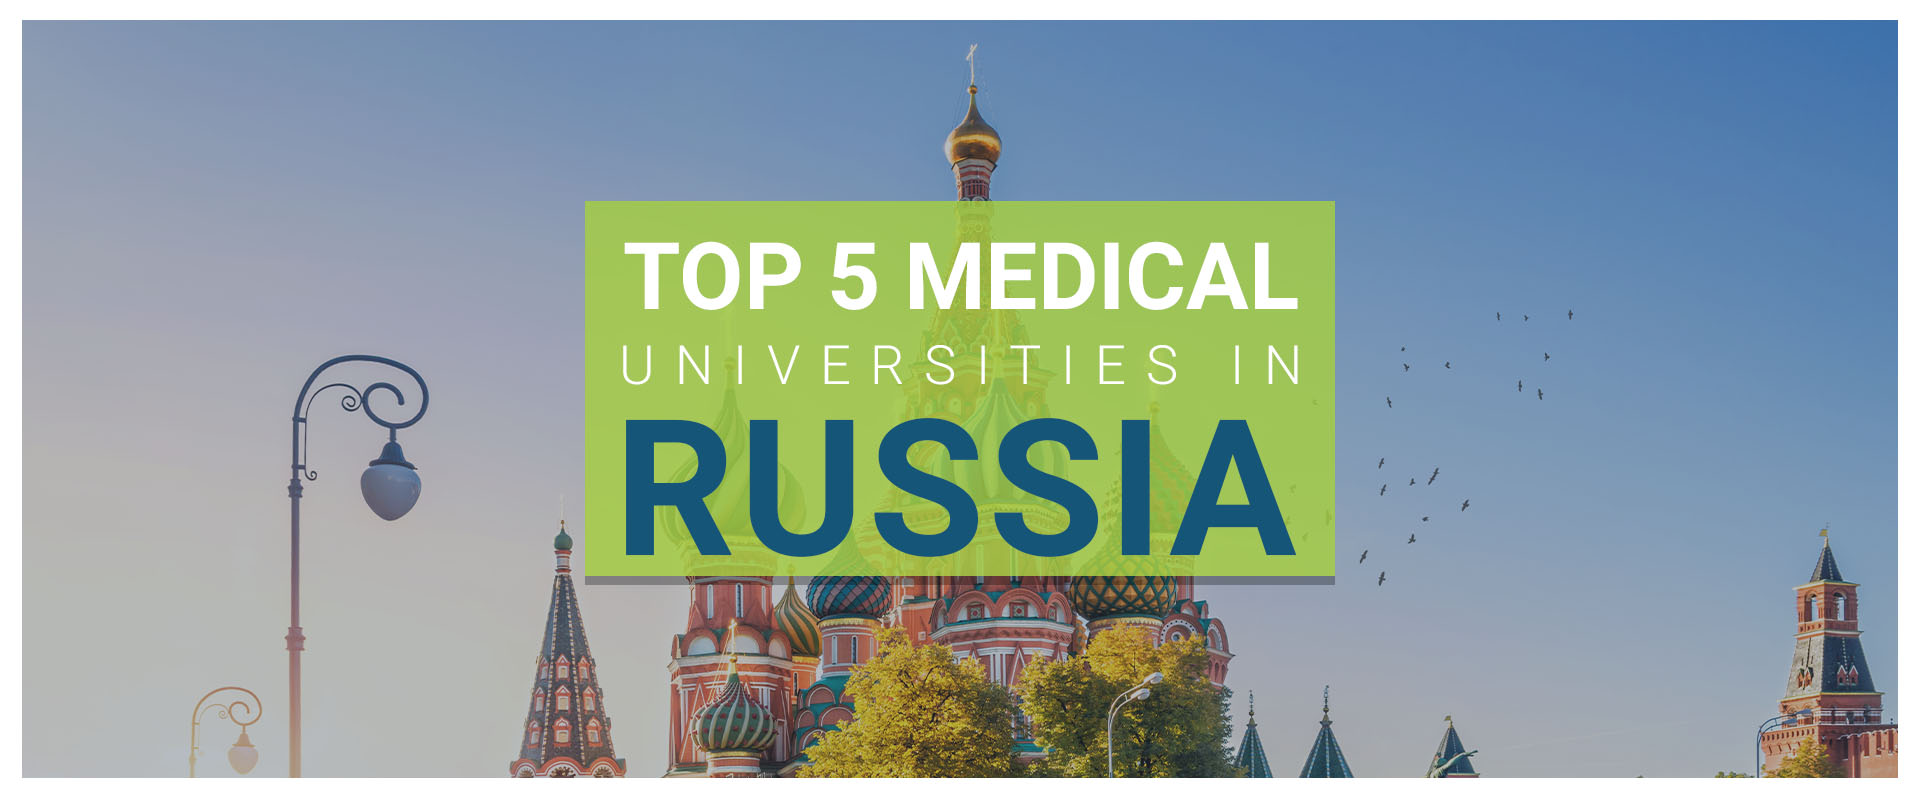 Top 5 Medical University in Russia